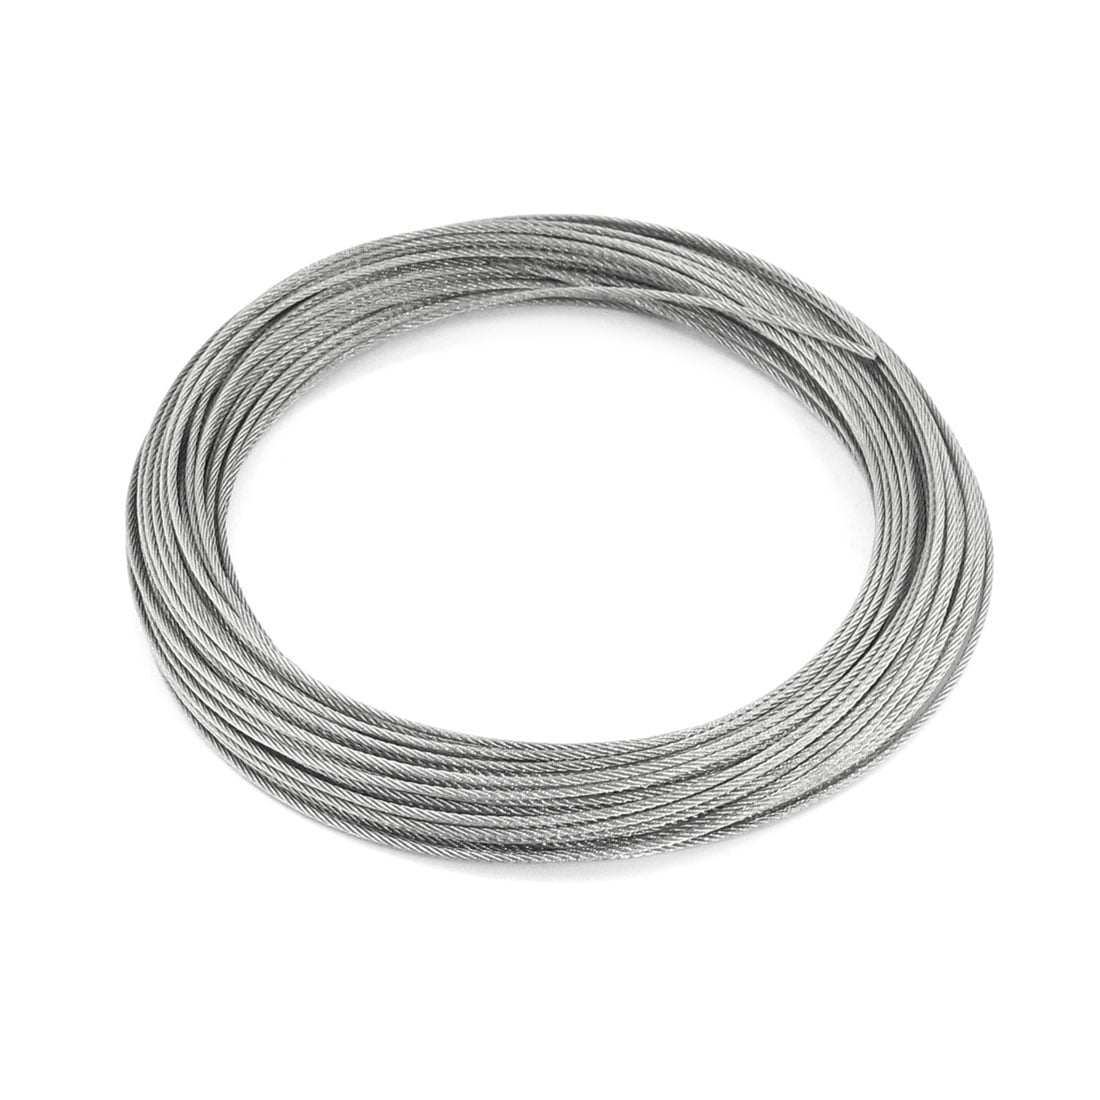 3mm 4mm Grinding Machine 7x19 Long Stainless Steel Wire Rope Cable New Dia 